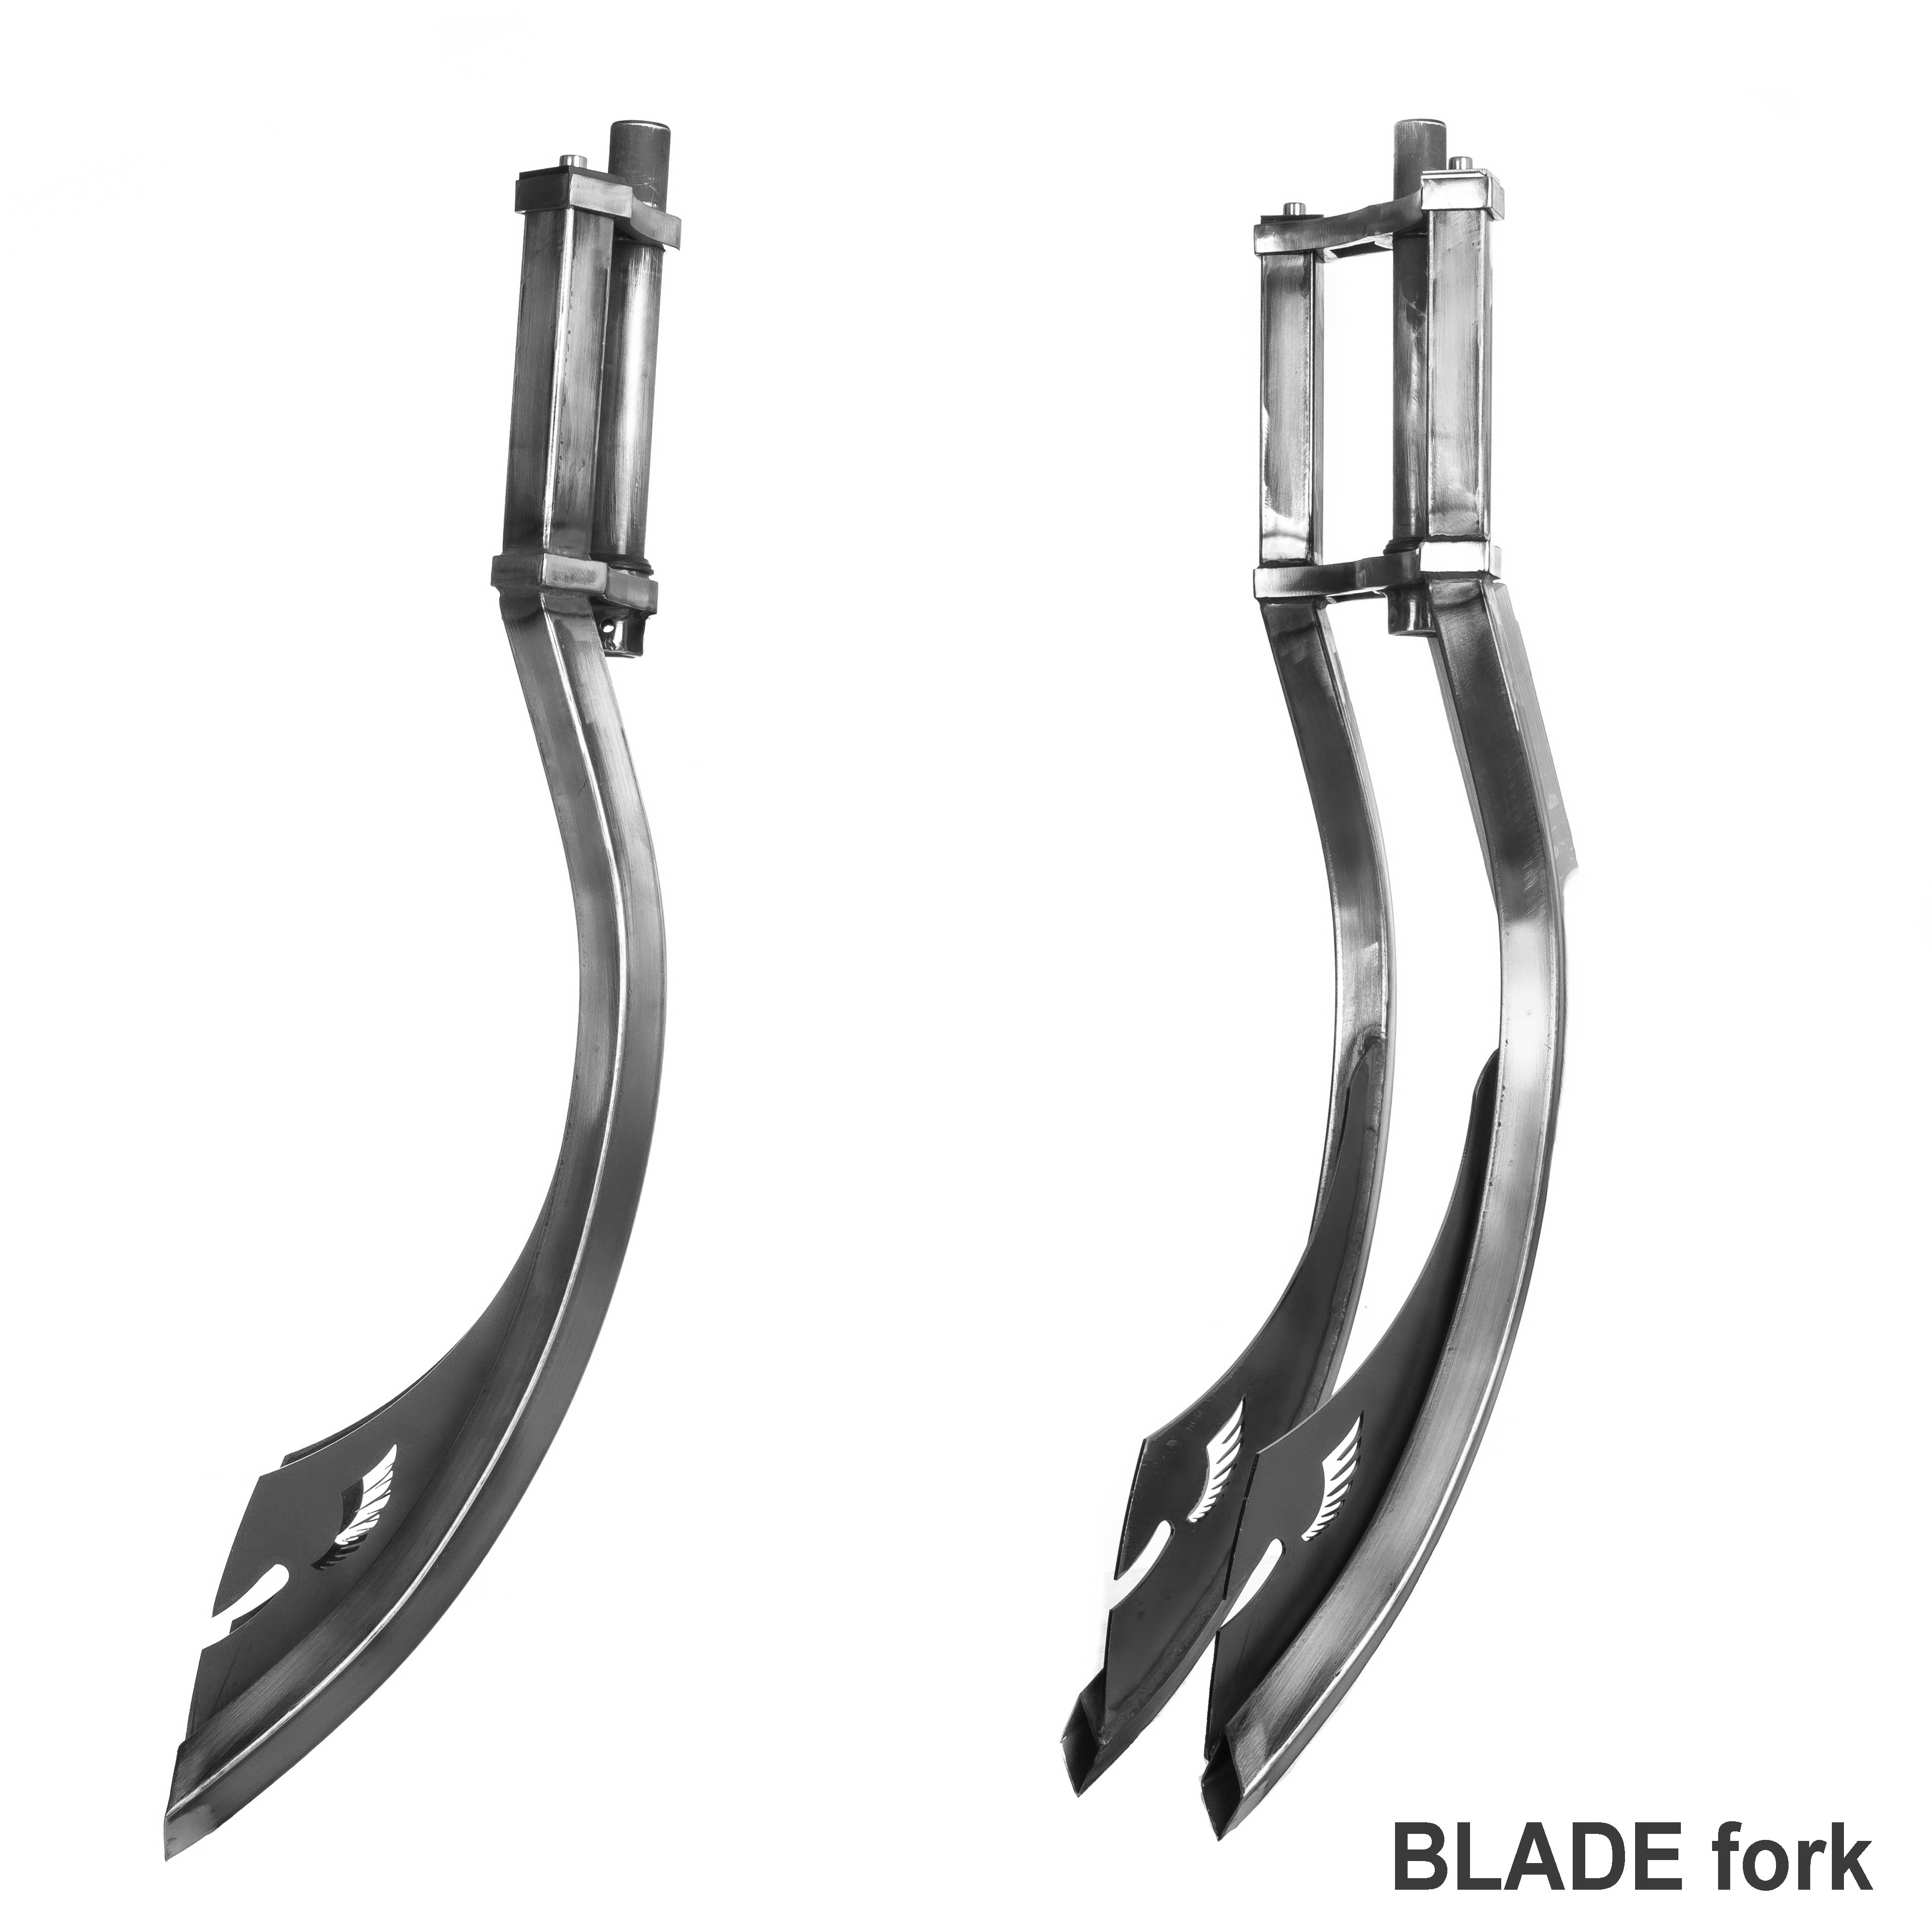 Blade Fork ALCB double crown, double down raw 1 1/8 steerer